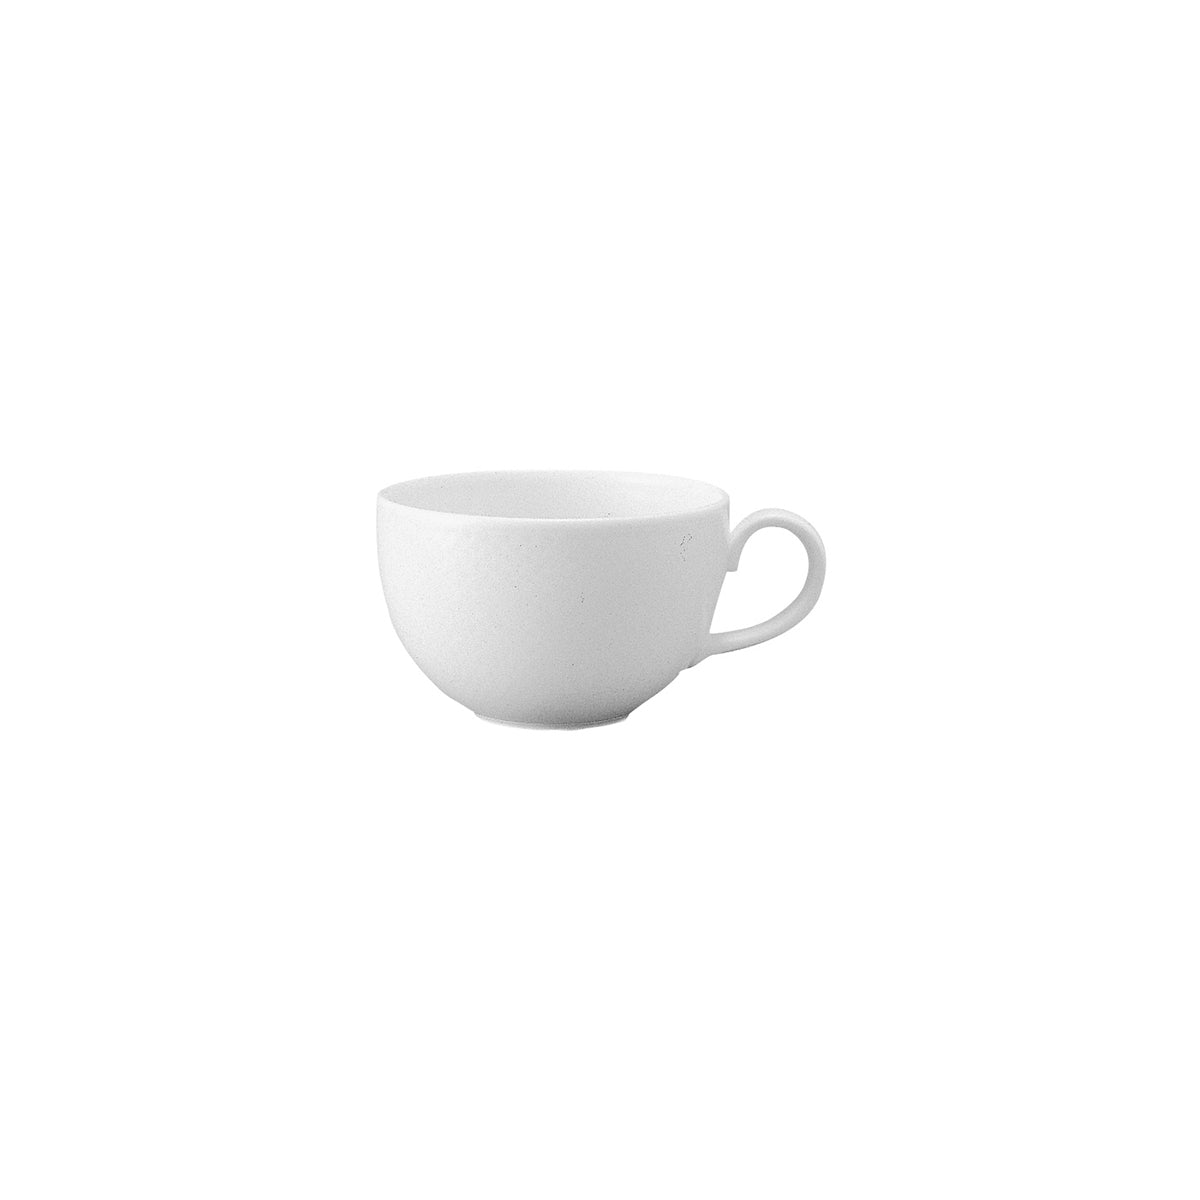 VB16-2155-1210 Villeroy And Boch Villeroy And Boch Easy White Cup No. 0 400ml Tomkin Australia Hospitality Supplies